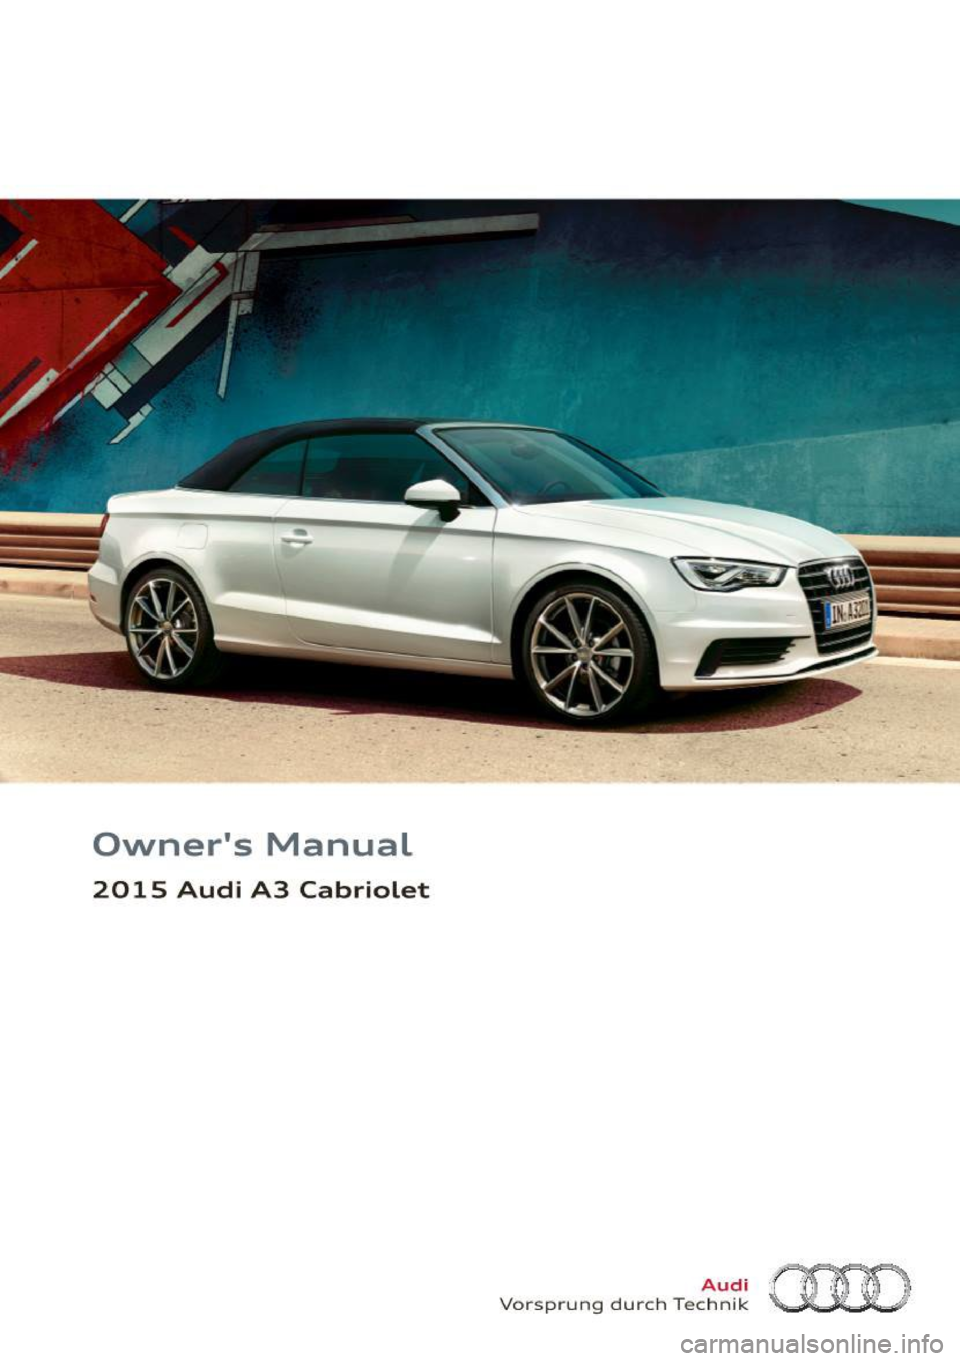 AUDI A3 CABRIOLET 2015  Owners Manual 